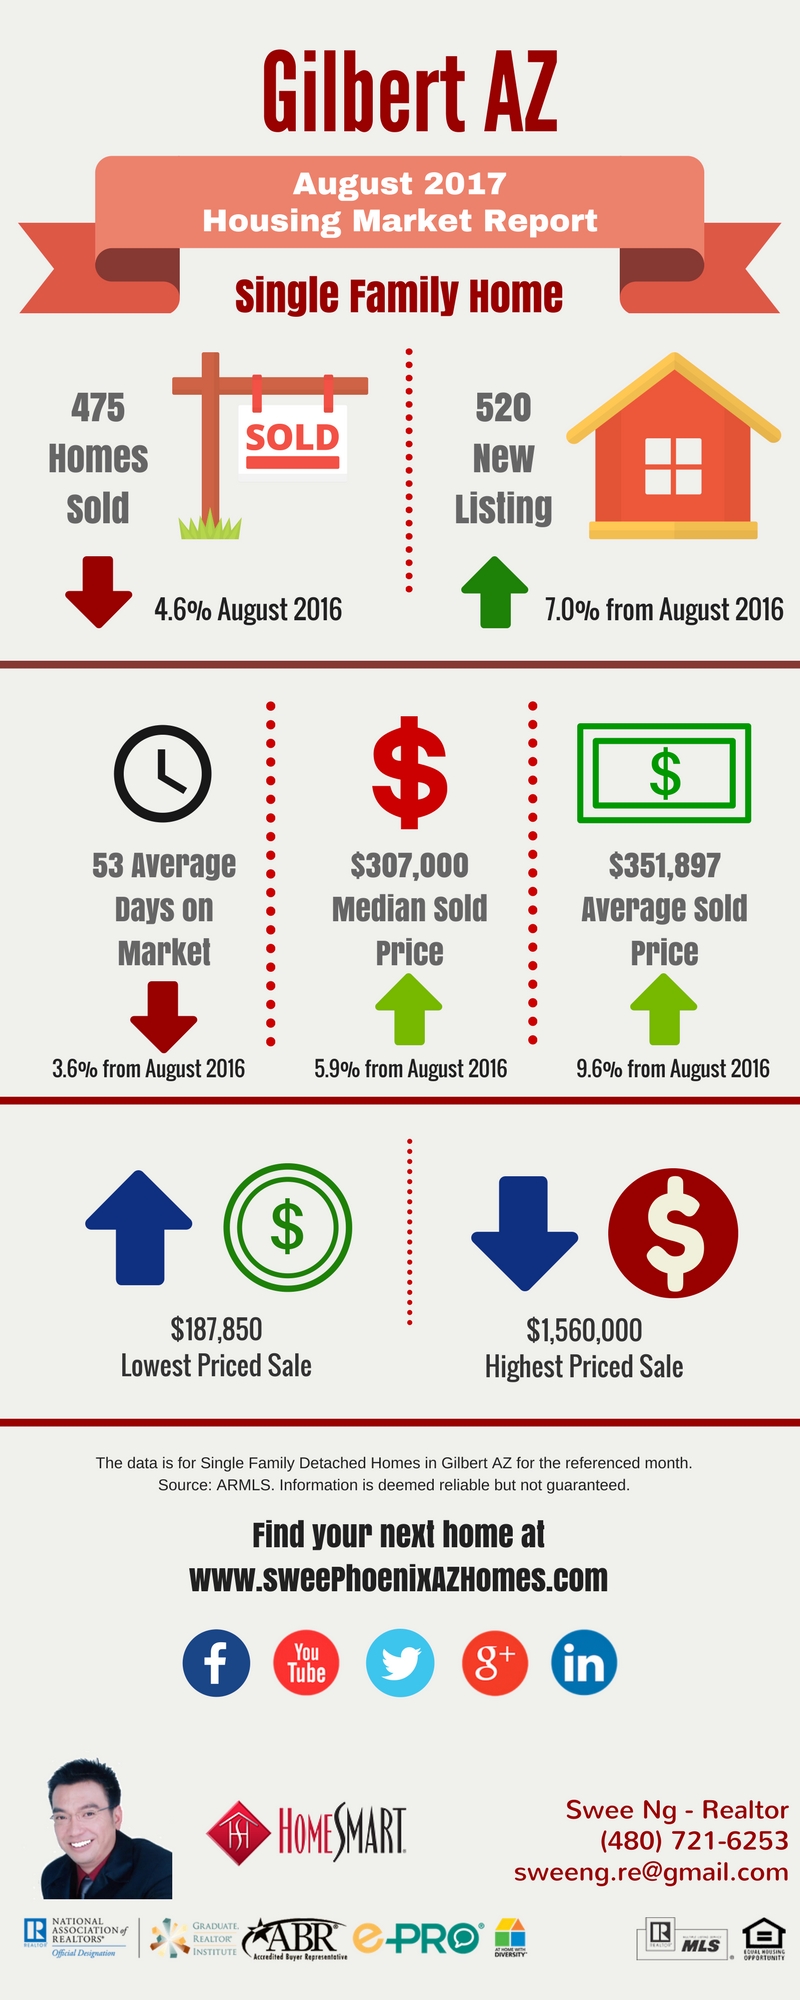 Gilbert AZ Housing Market Trends Report August 2017 by Swee Ng, Real Estate and House Value